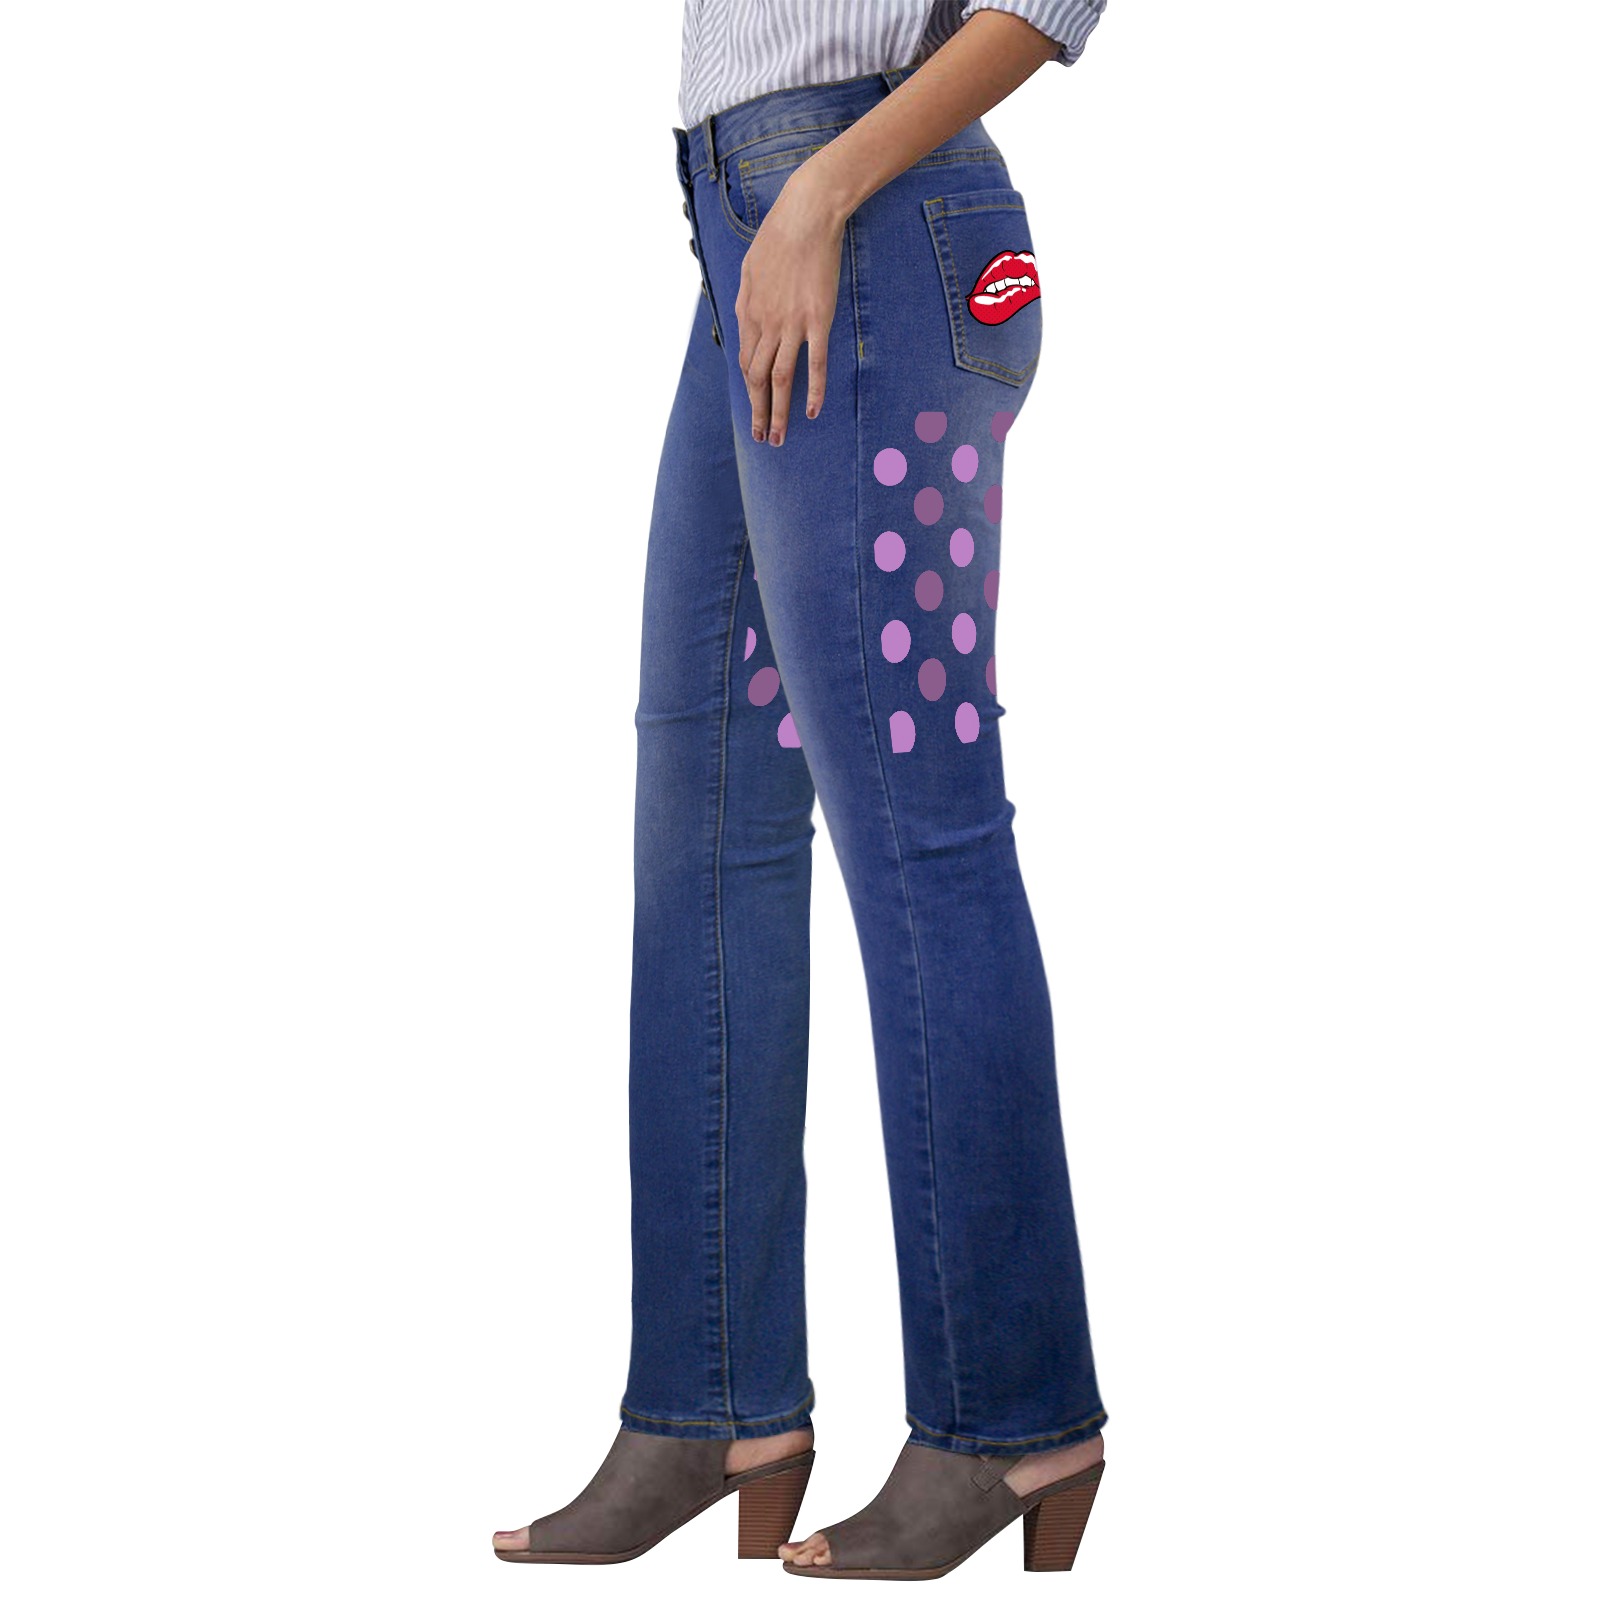 Women's Jeans (Back Printing)